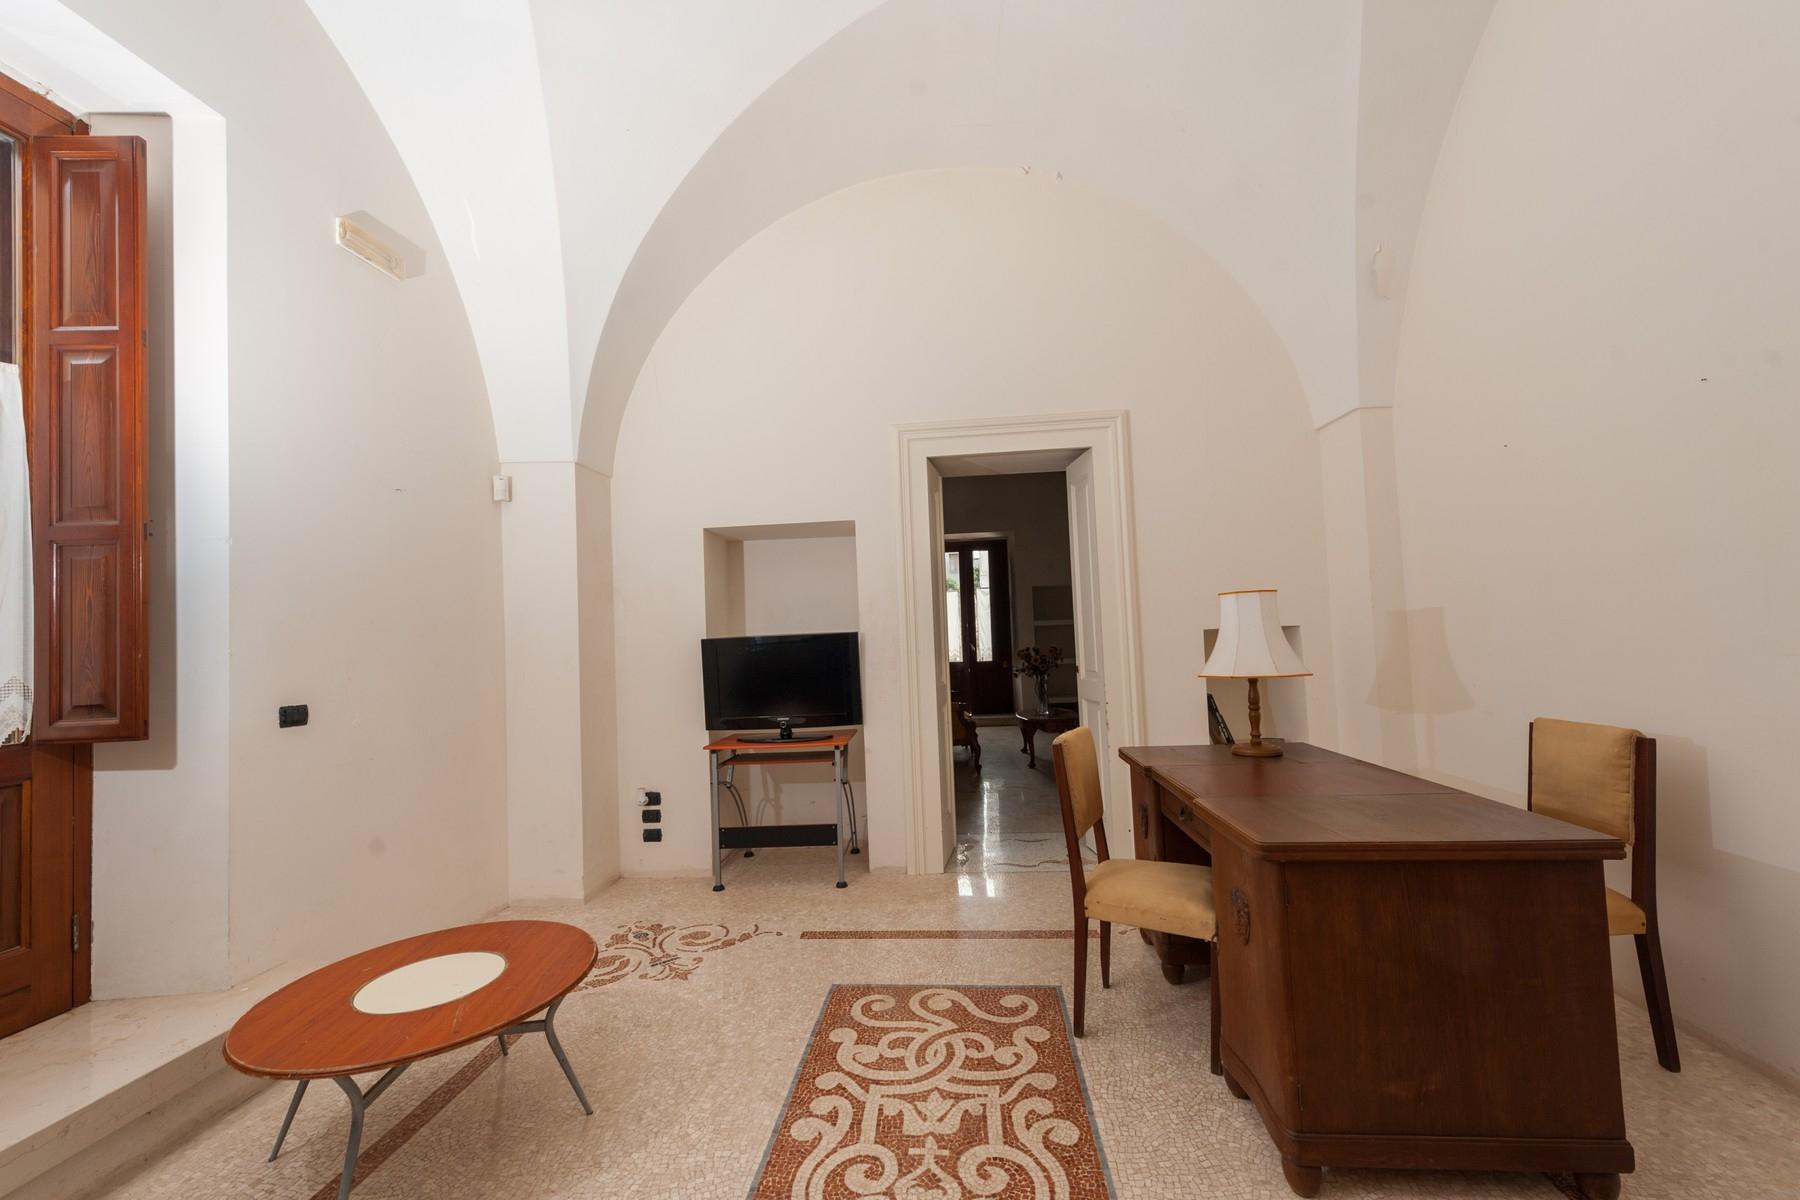 Palazzo Micali, a little gem in Salento - 29